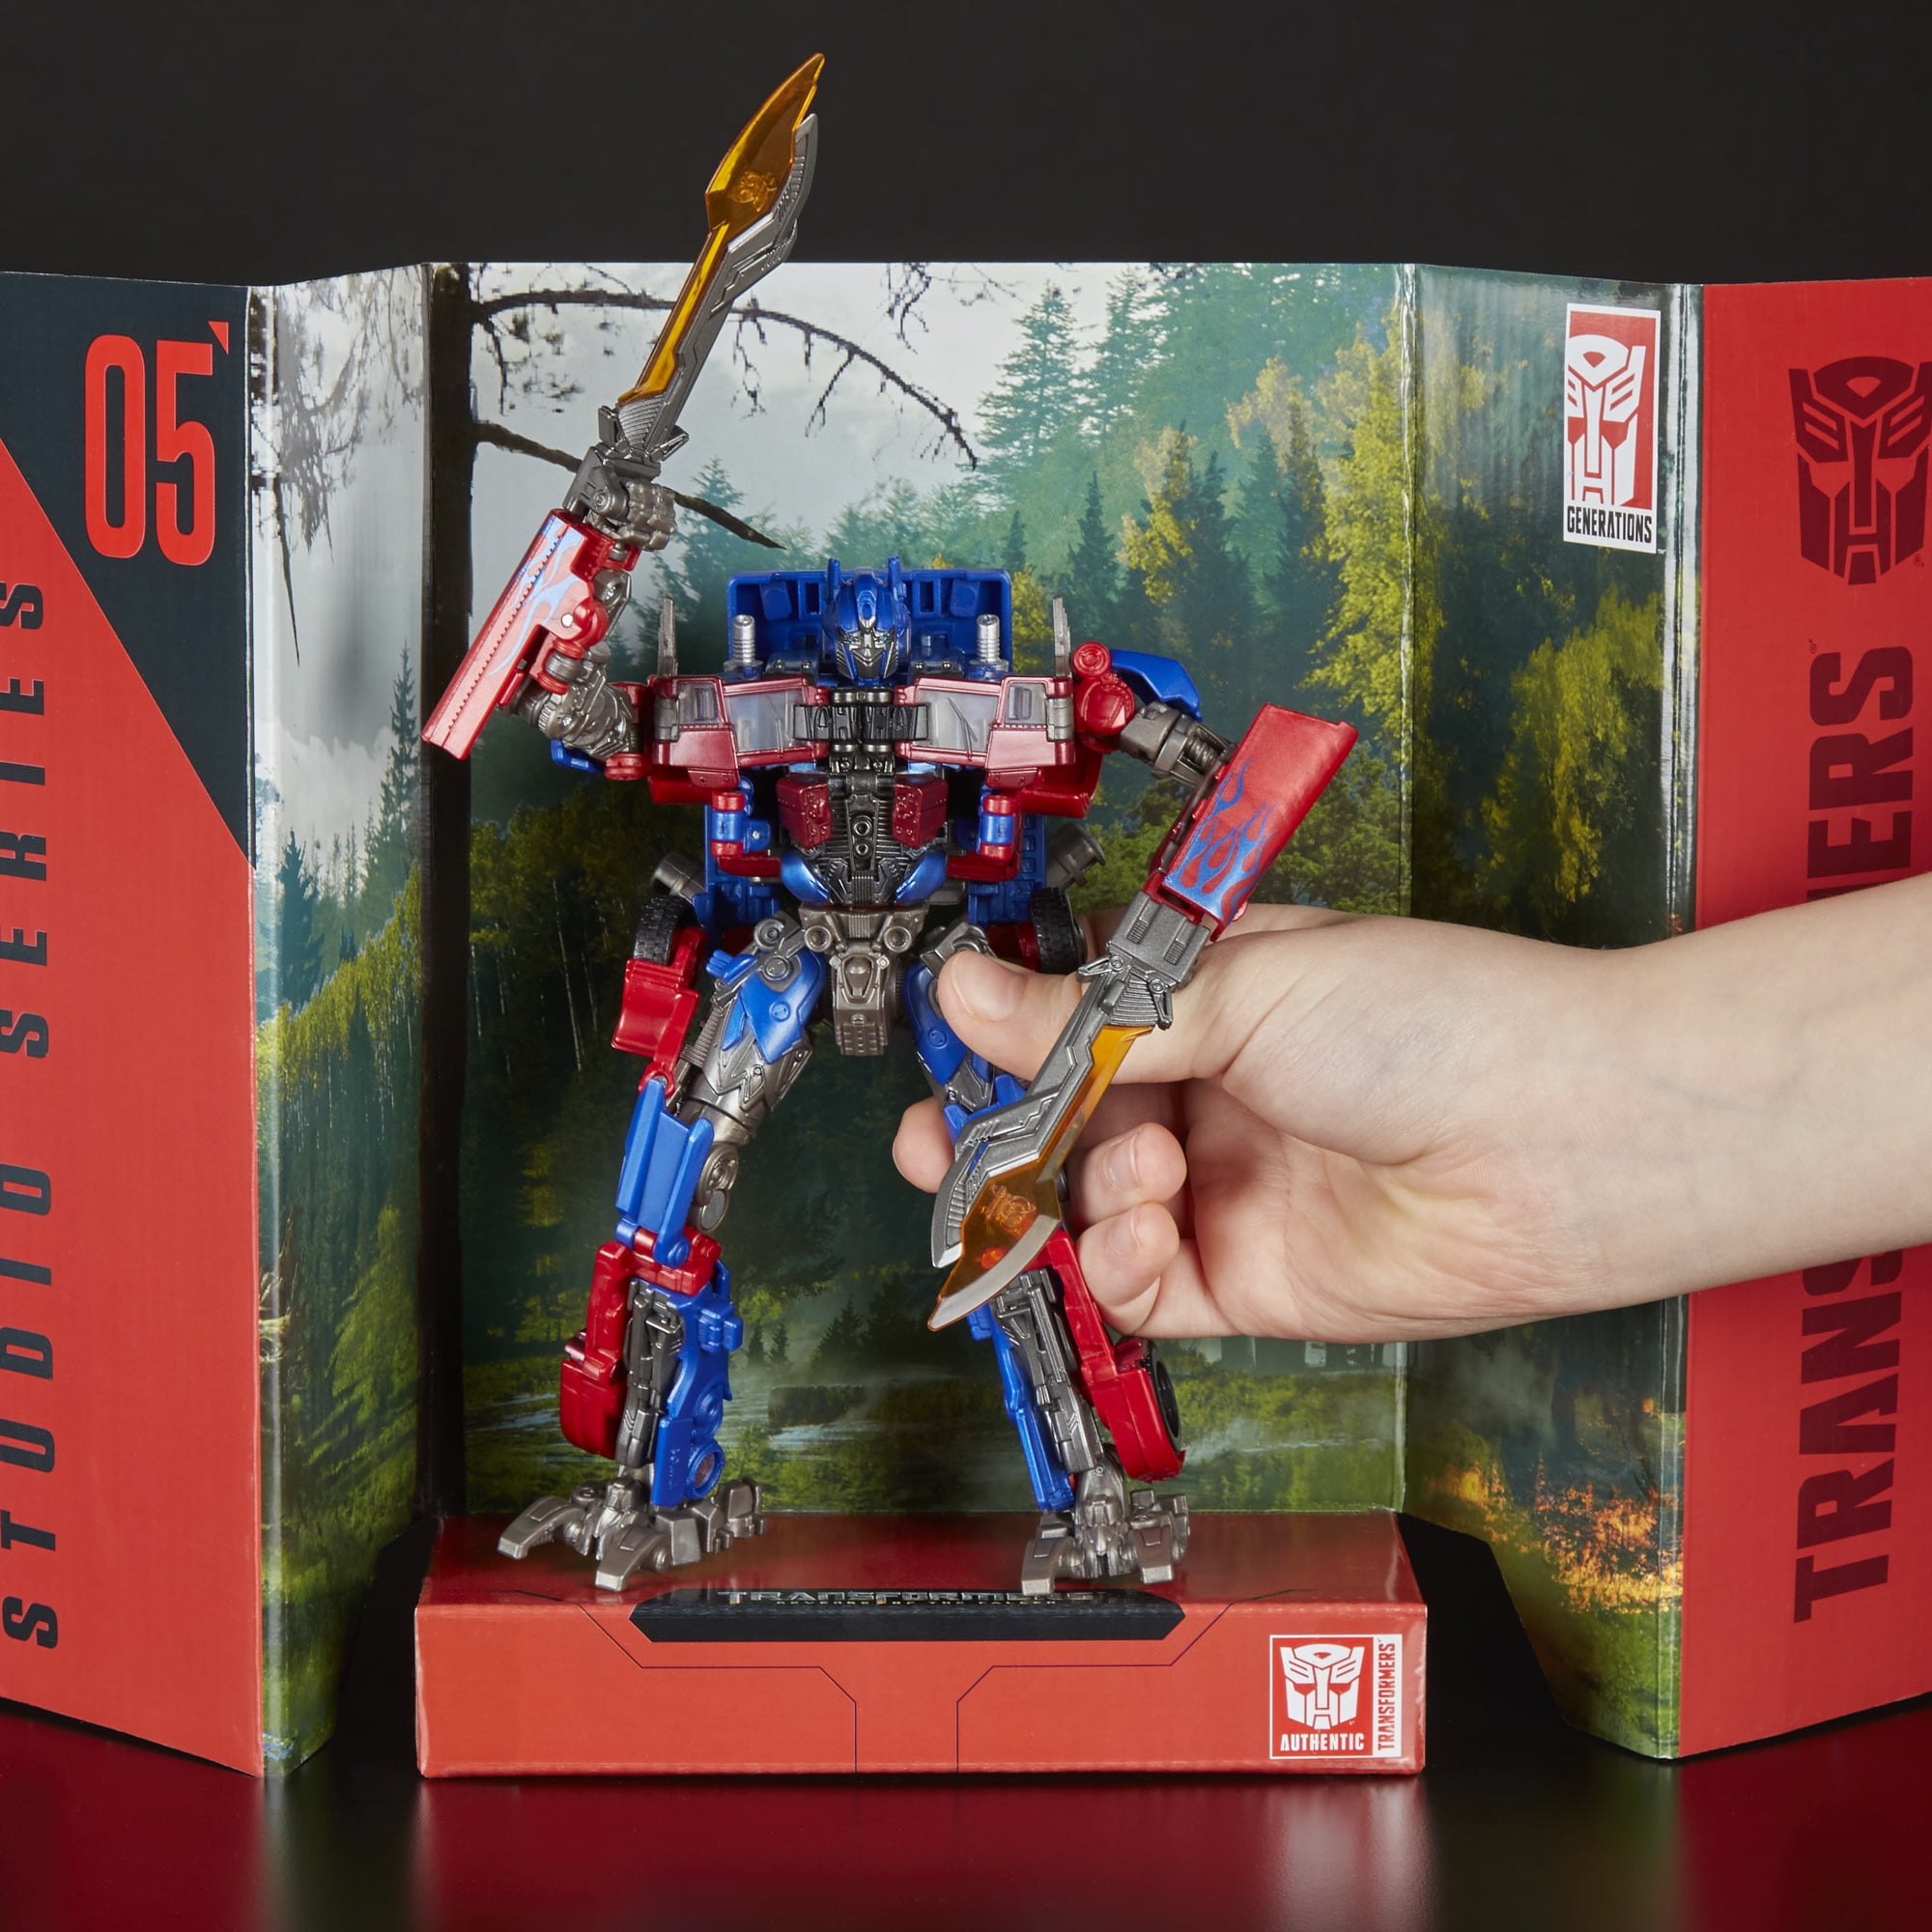 Details about   TAKARA Transformers Movie Studio Series Voyager Optimus Prime Action Figure SS05 